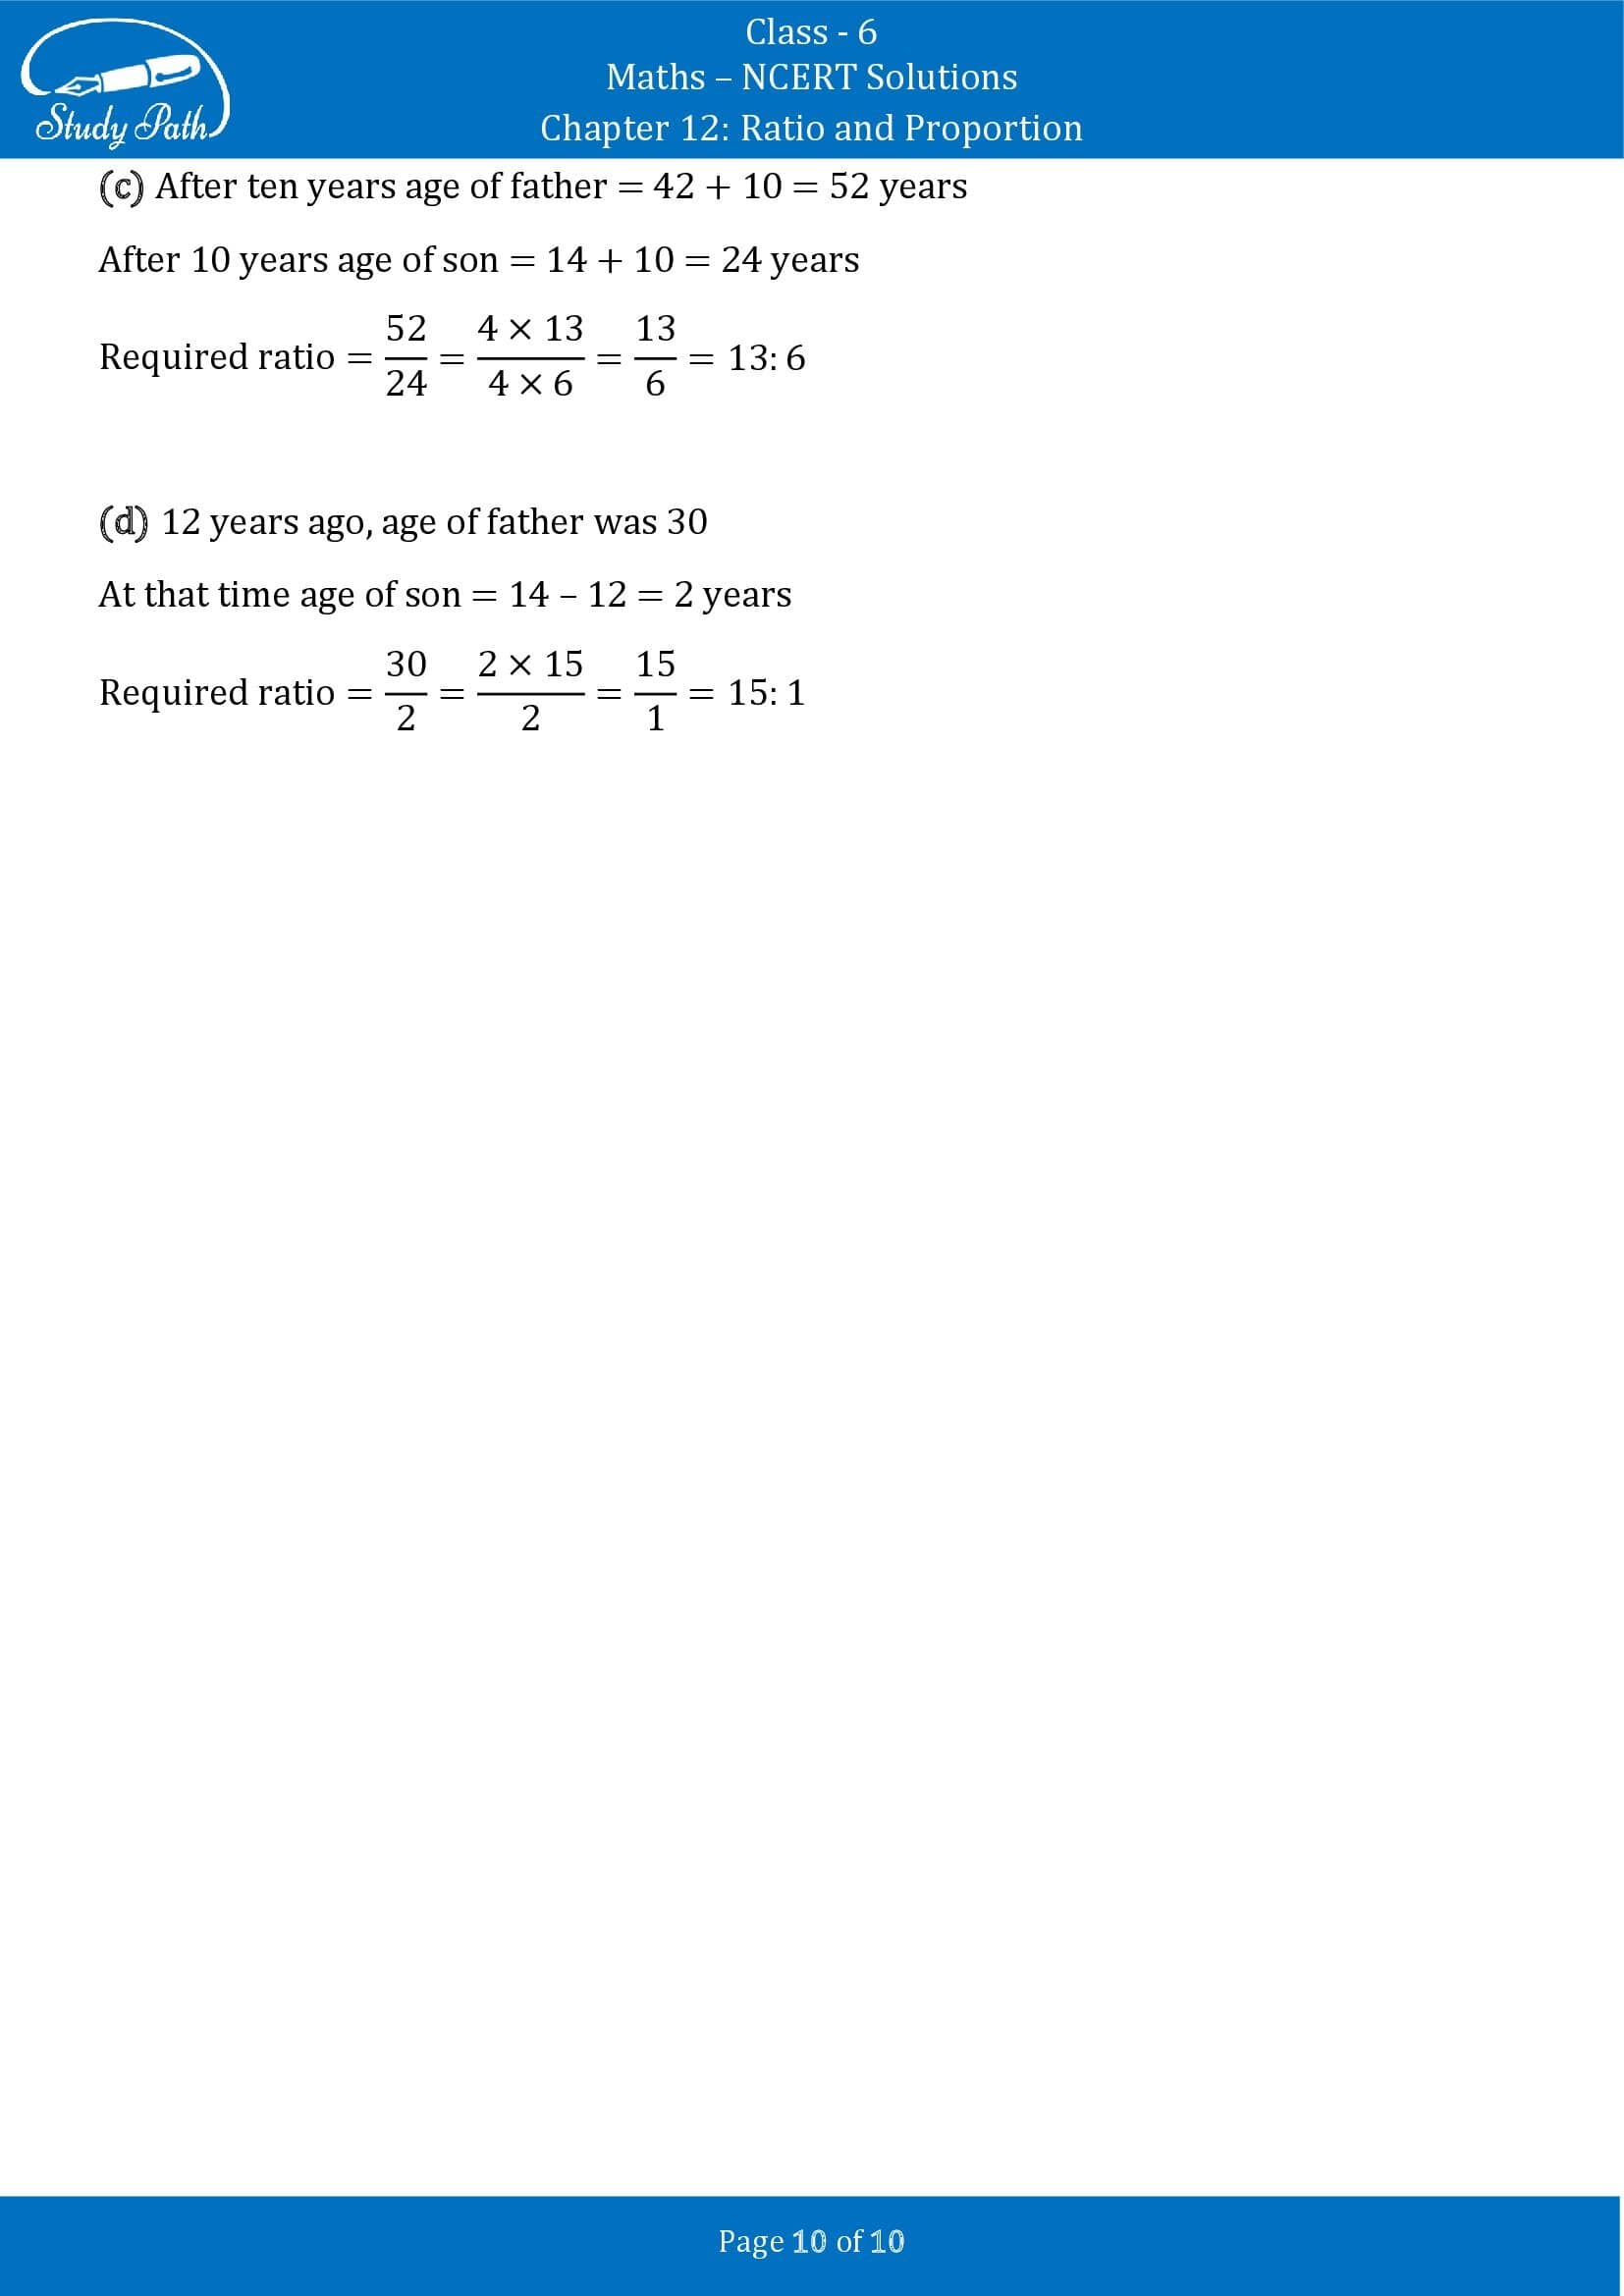 NCERT Solutions for Class 6 Maths Chapter 12 Ratio and Proportion Exercise 12.1 00010